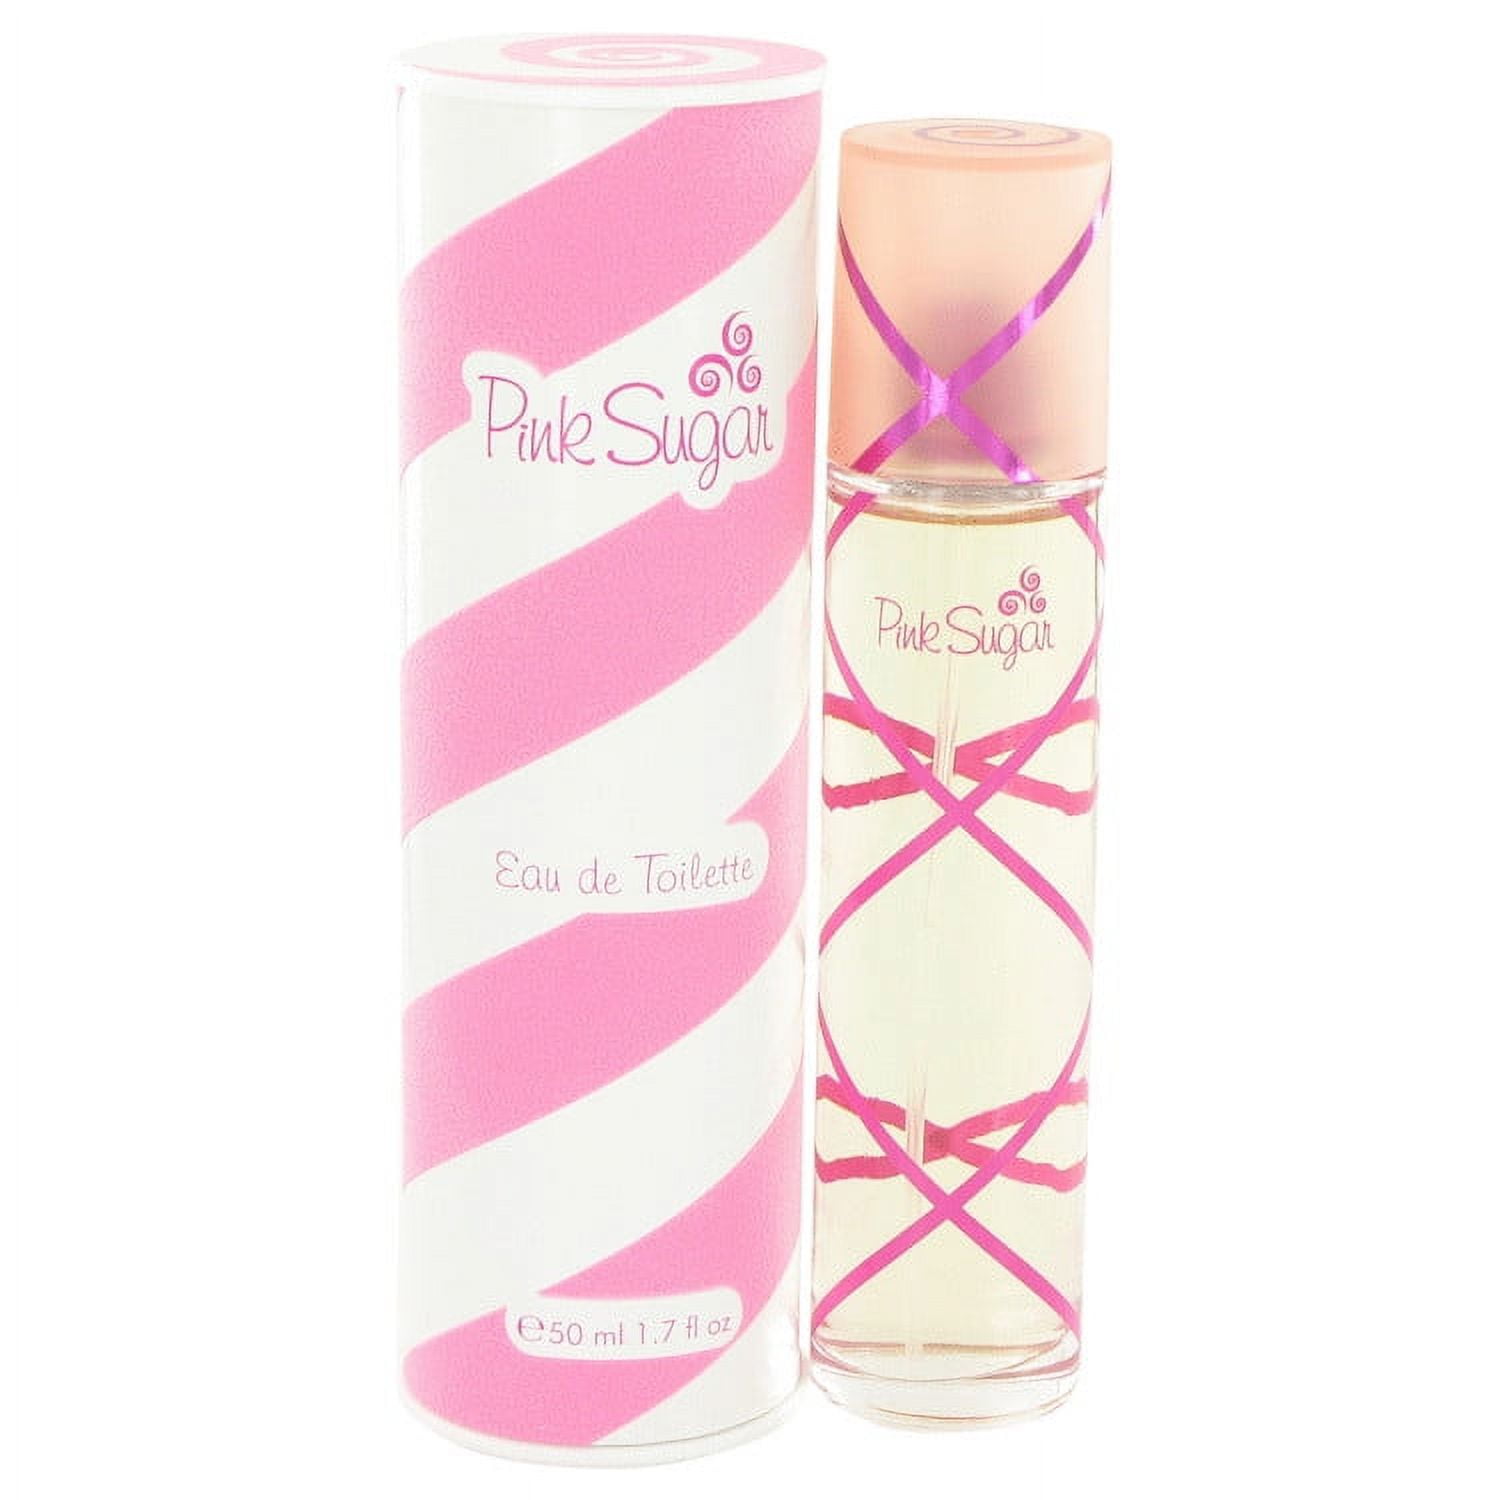 Impression of Pink sugar by Aquolina type perfume Body Oil Roll On 1 o –  World Scents and More